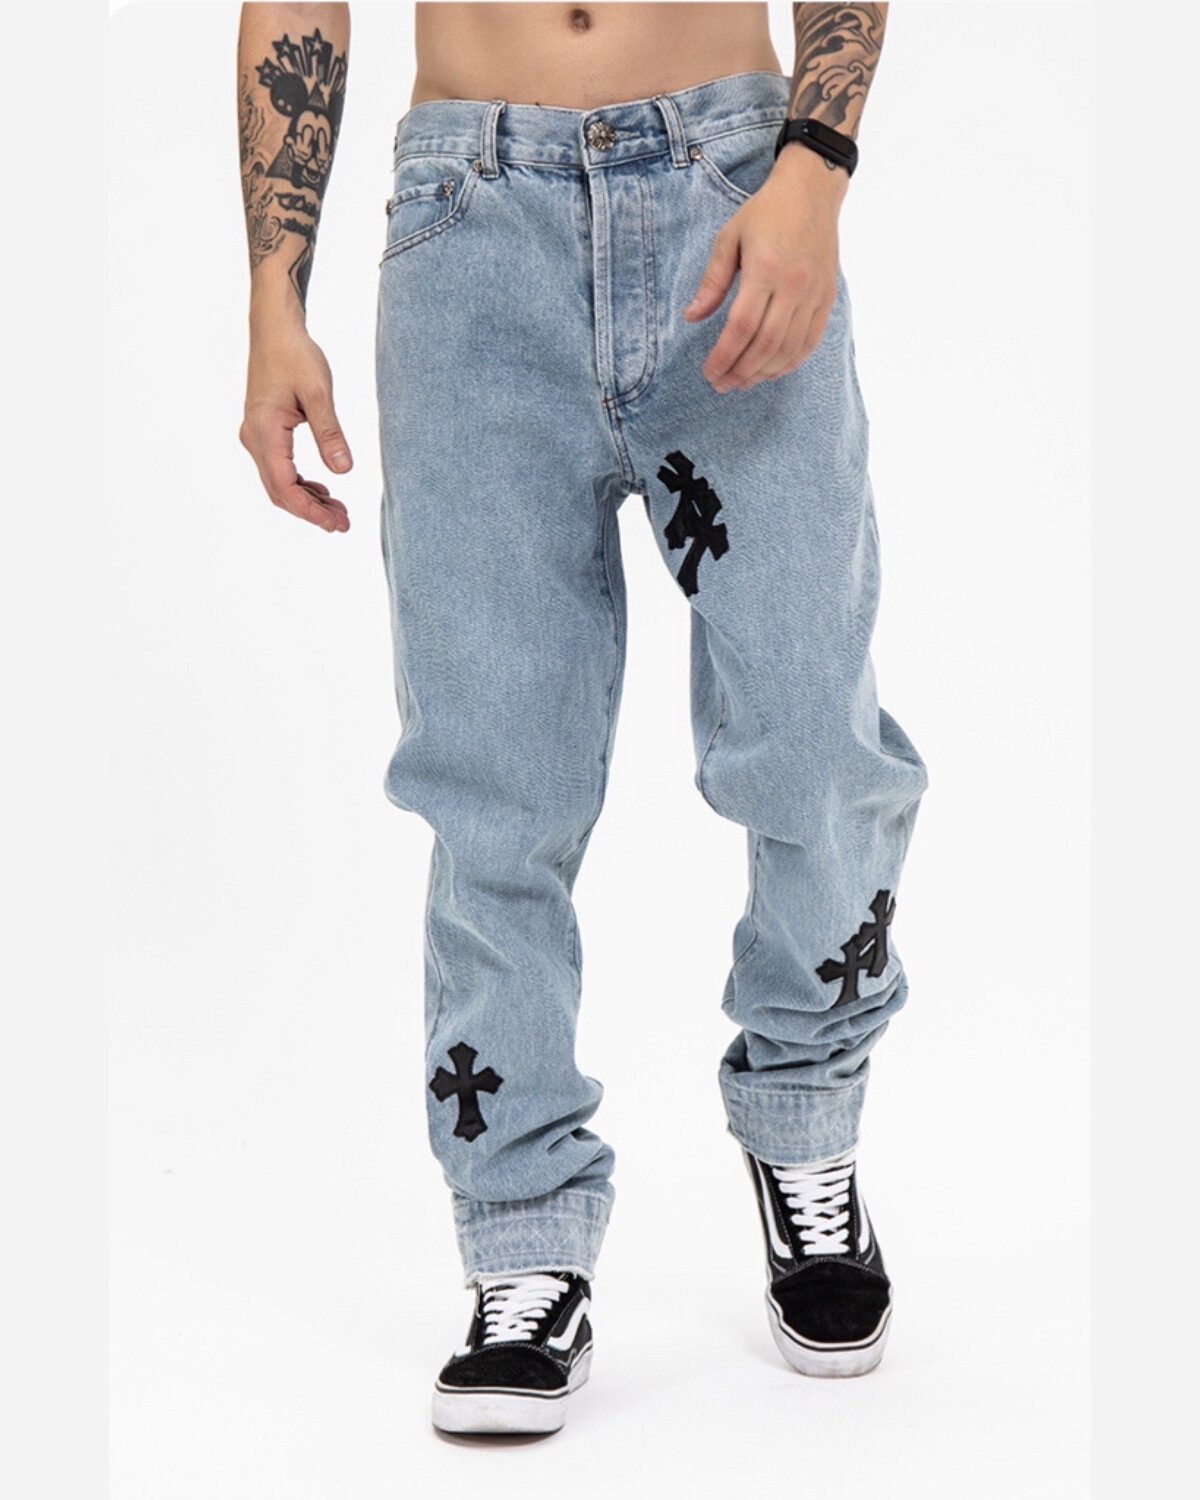 FG LEATHER CROSS JEANS